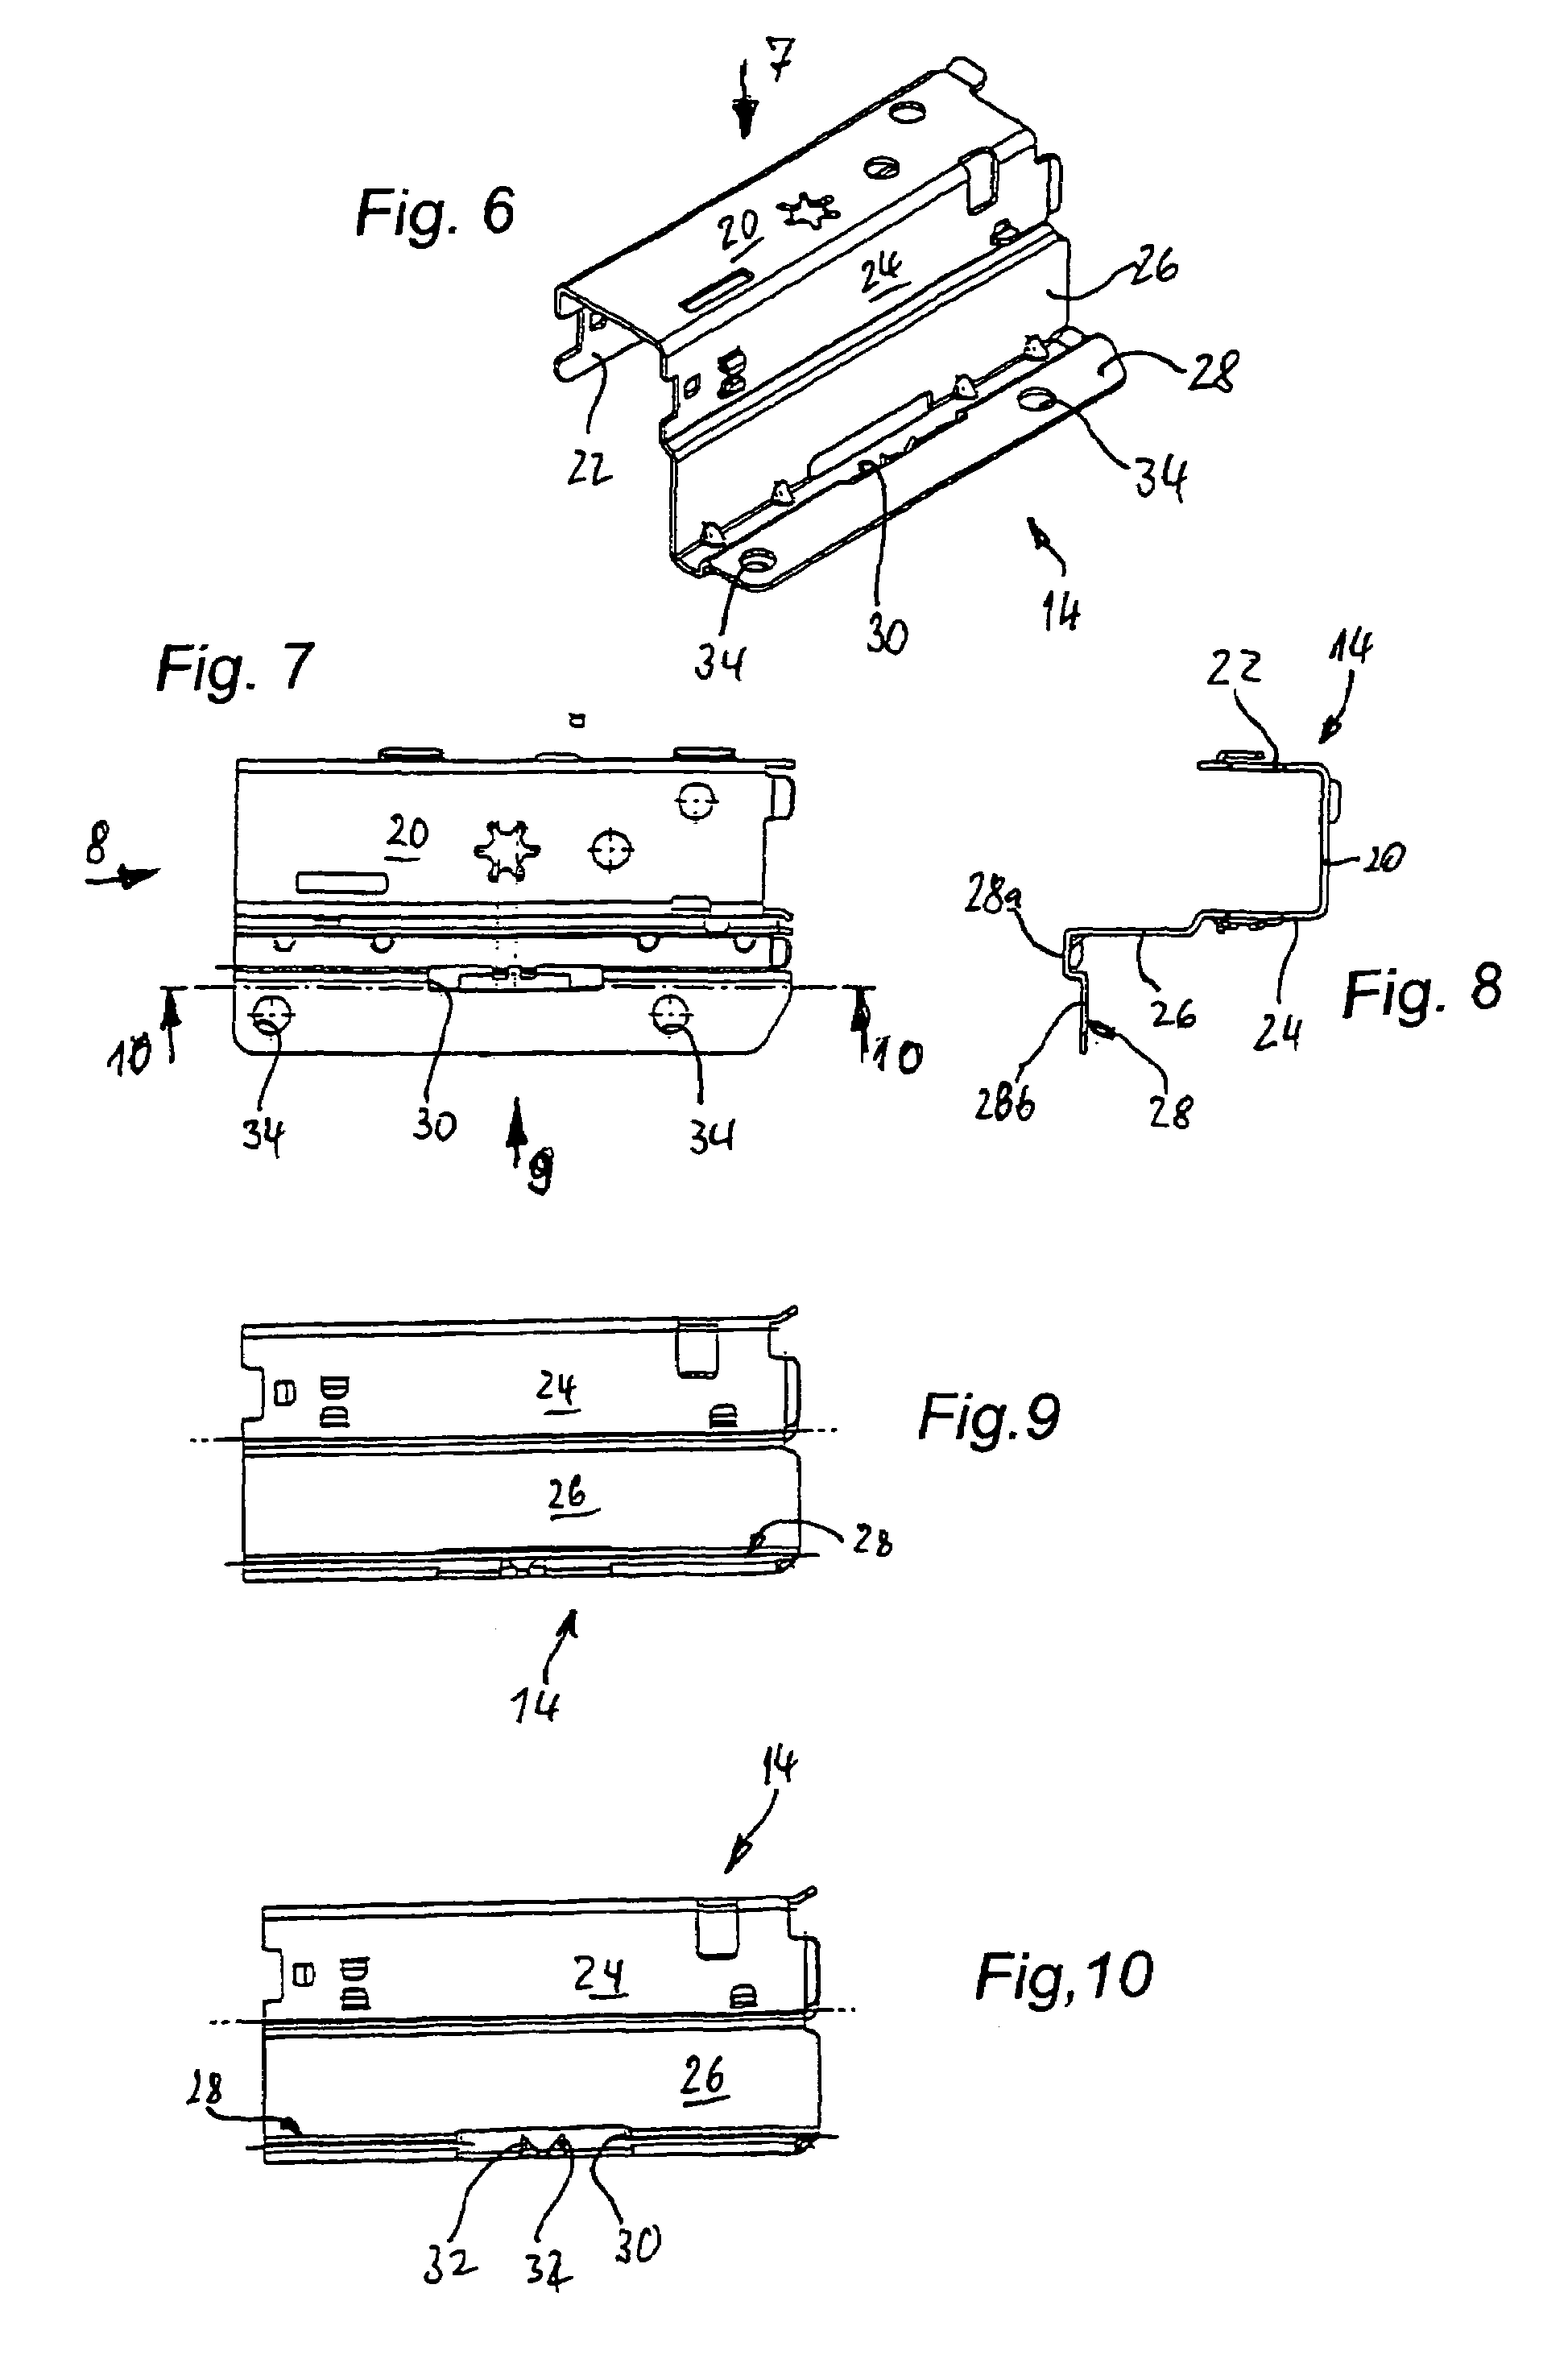 Arrangement for connecting a drawer frame to the bottom of a drawer